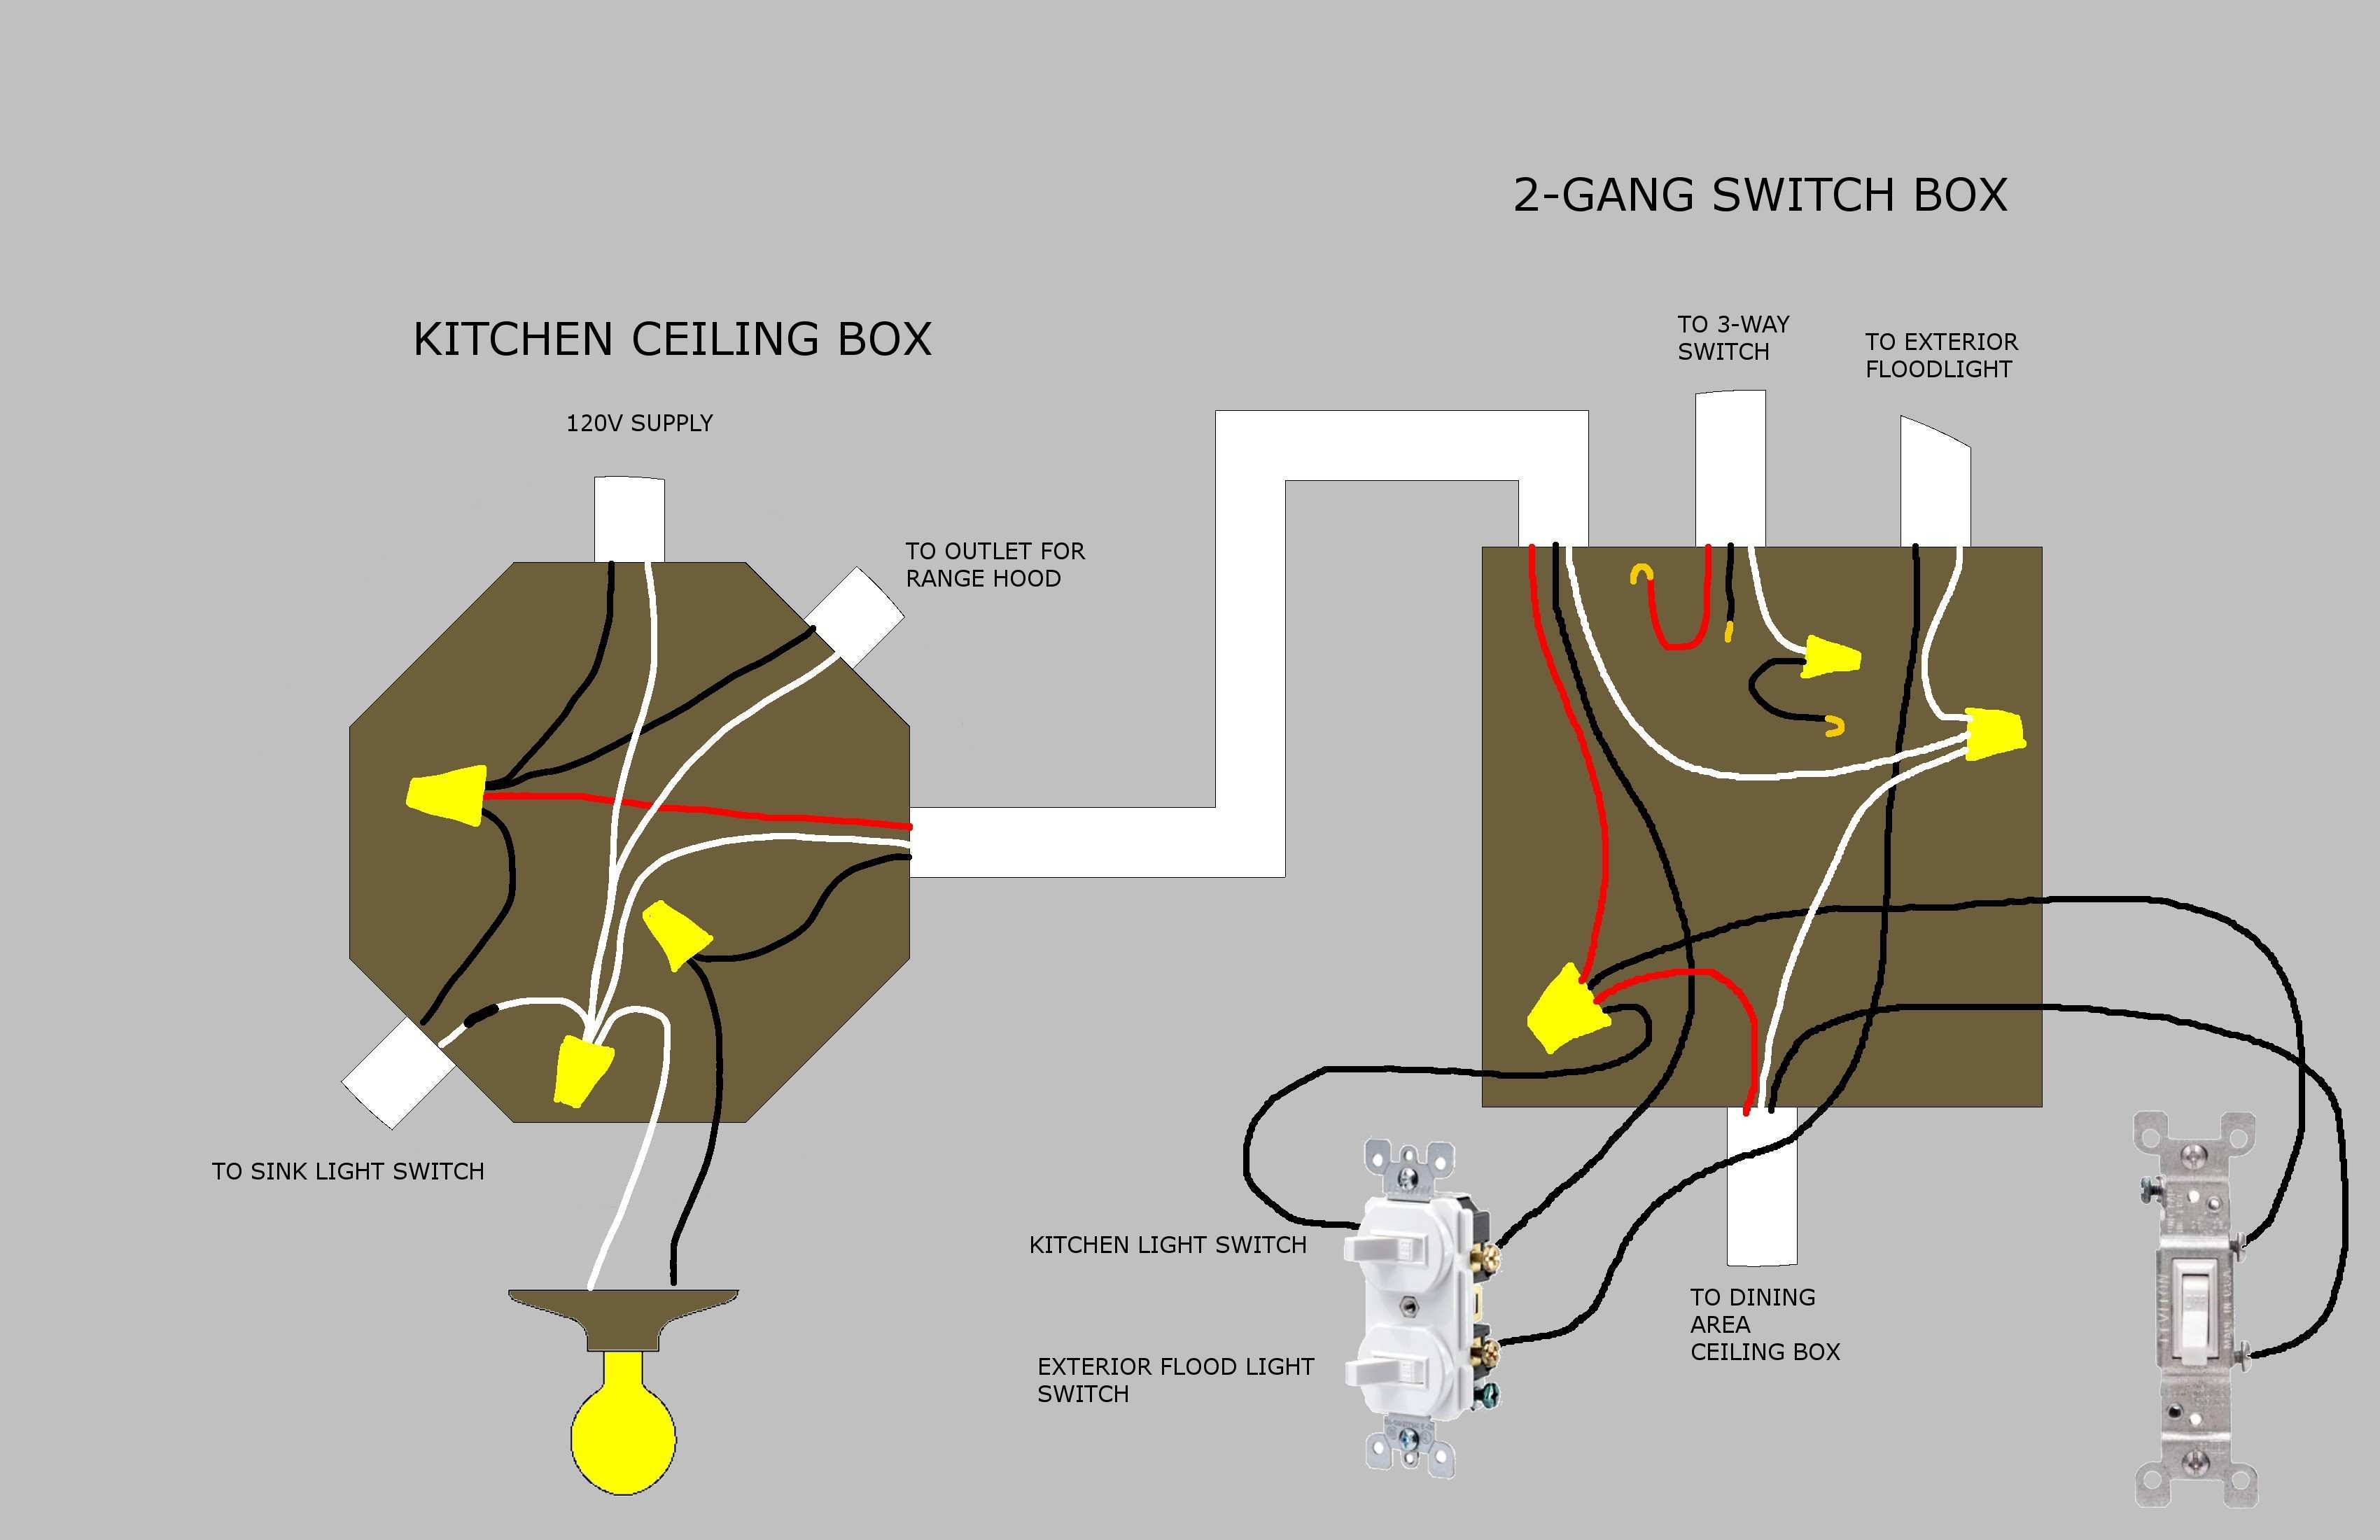 3 Way Switch Ceiling Fan To Capacitor Wiring Diagram | Best Wiring - 5 Wire Ceiling Fan Capacitor Wiring Diagram